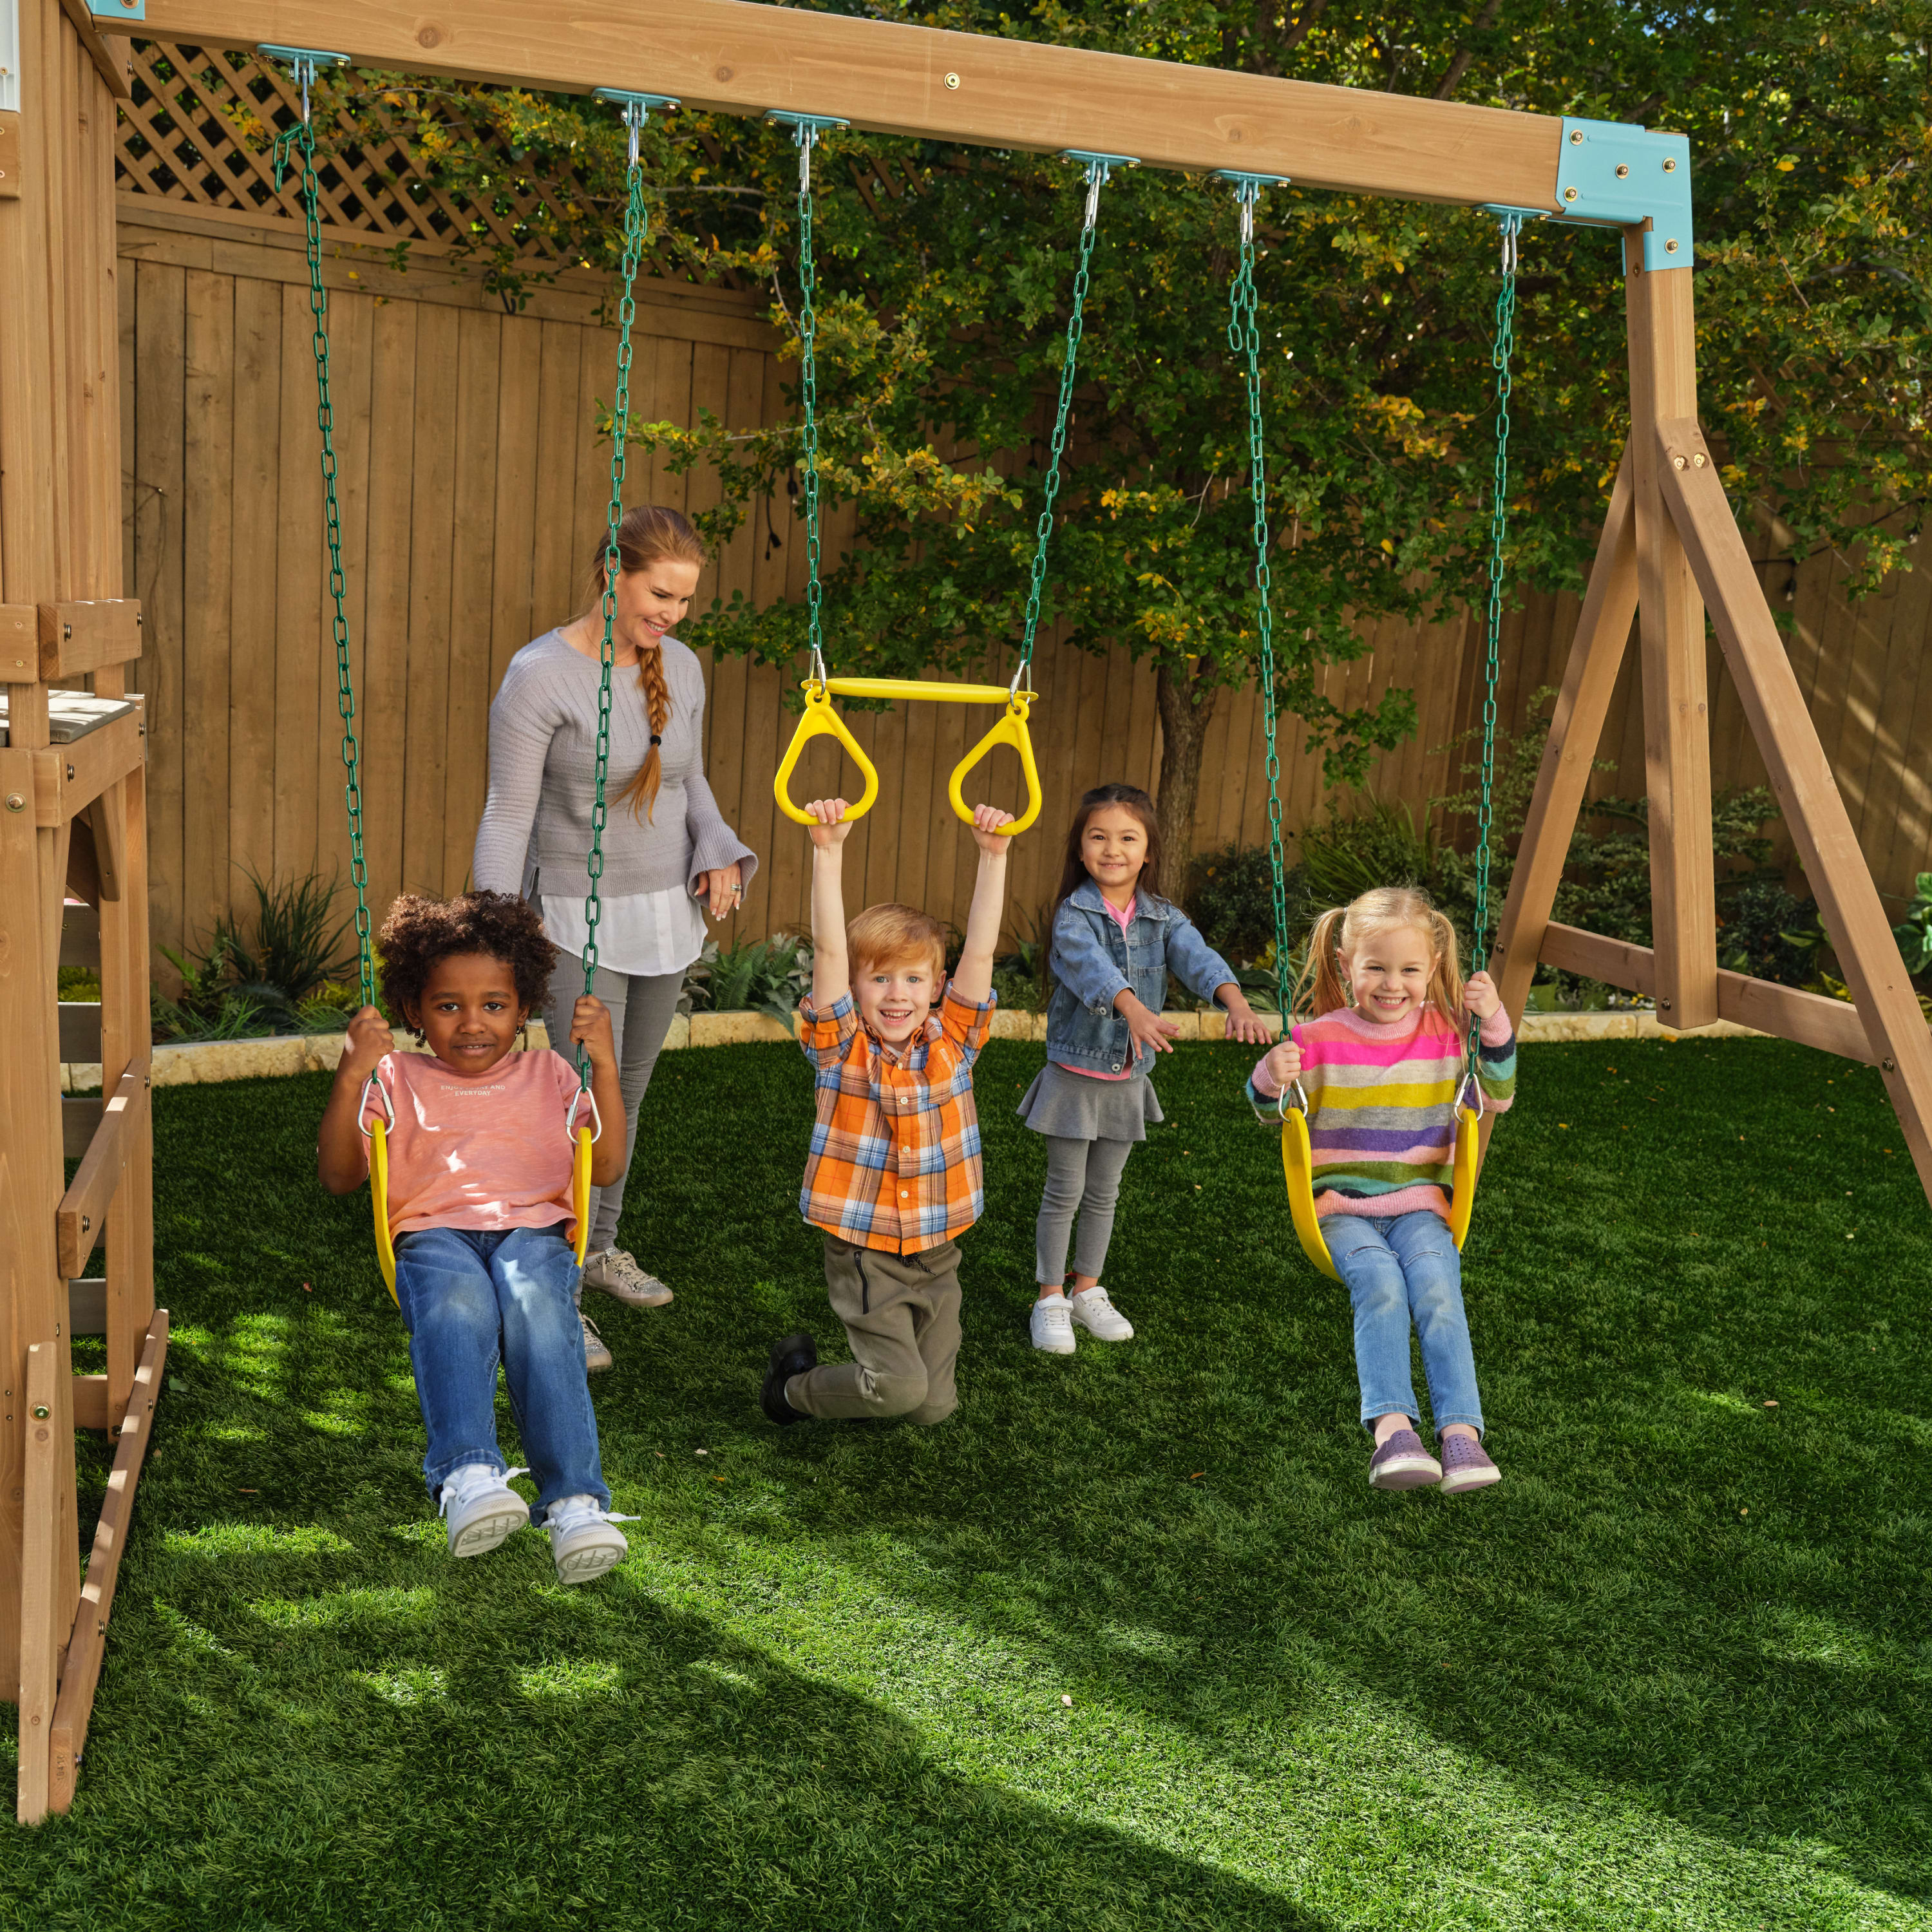 KidKraft Modern Wooden Outdoor Swing Set with Slide and Fireman's Pole - image 4 of 14